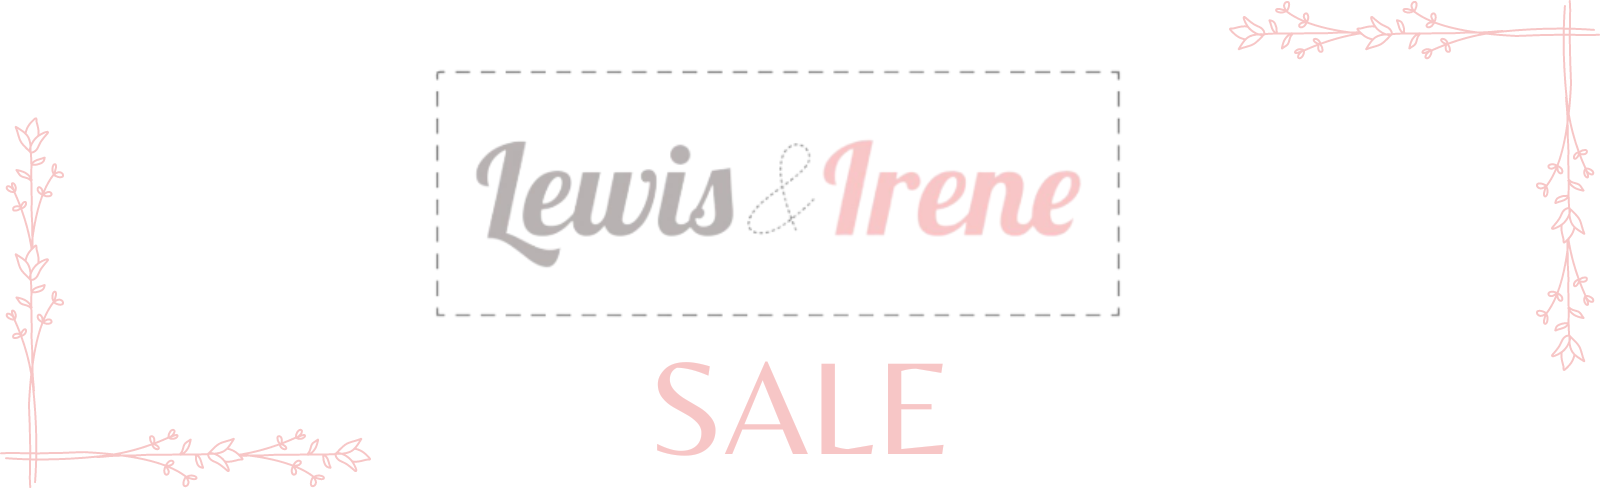 Lewis and Irene SALE - Sewing Direct